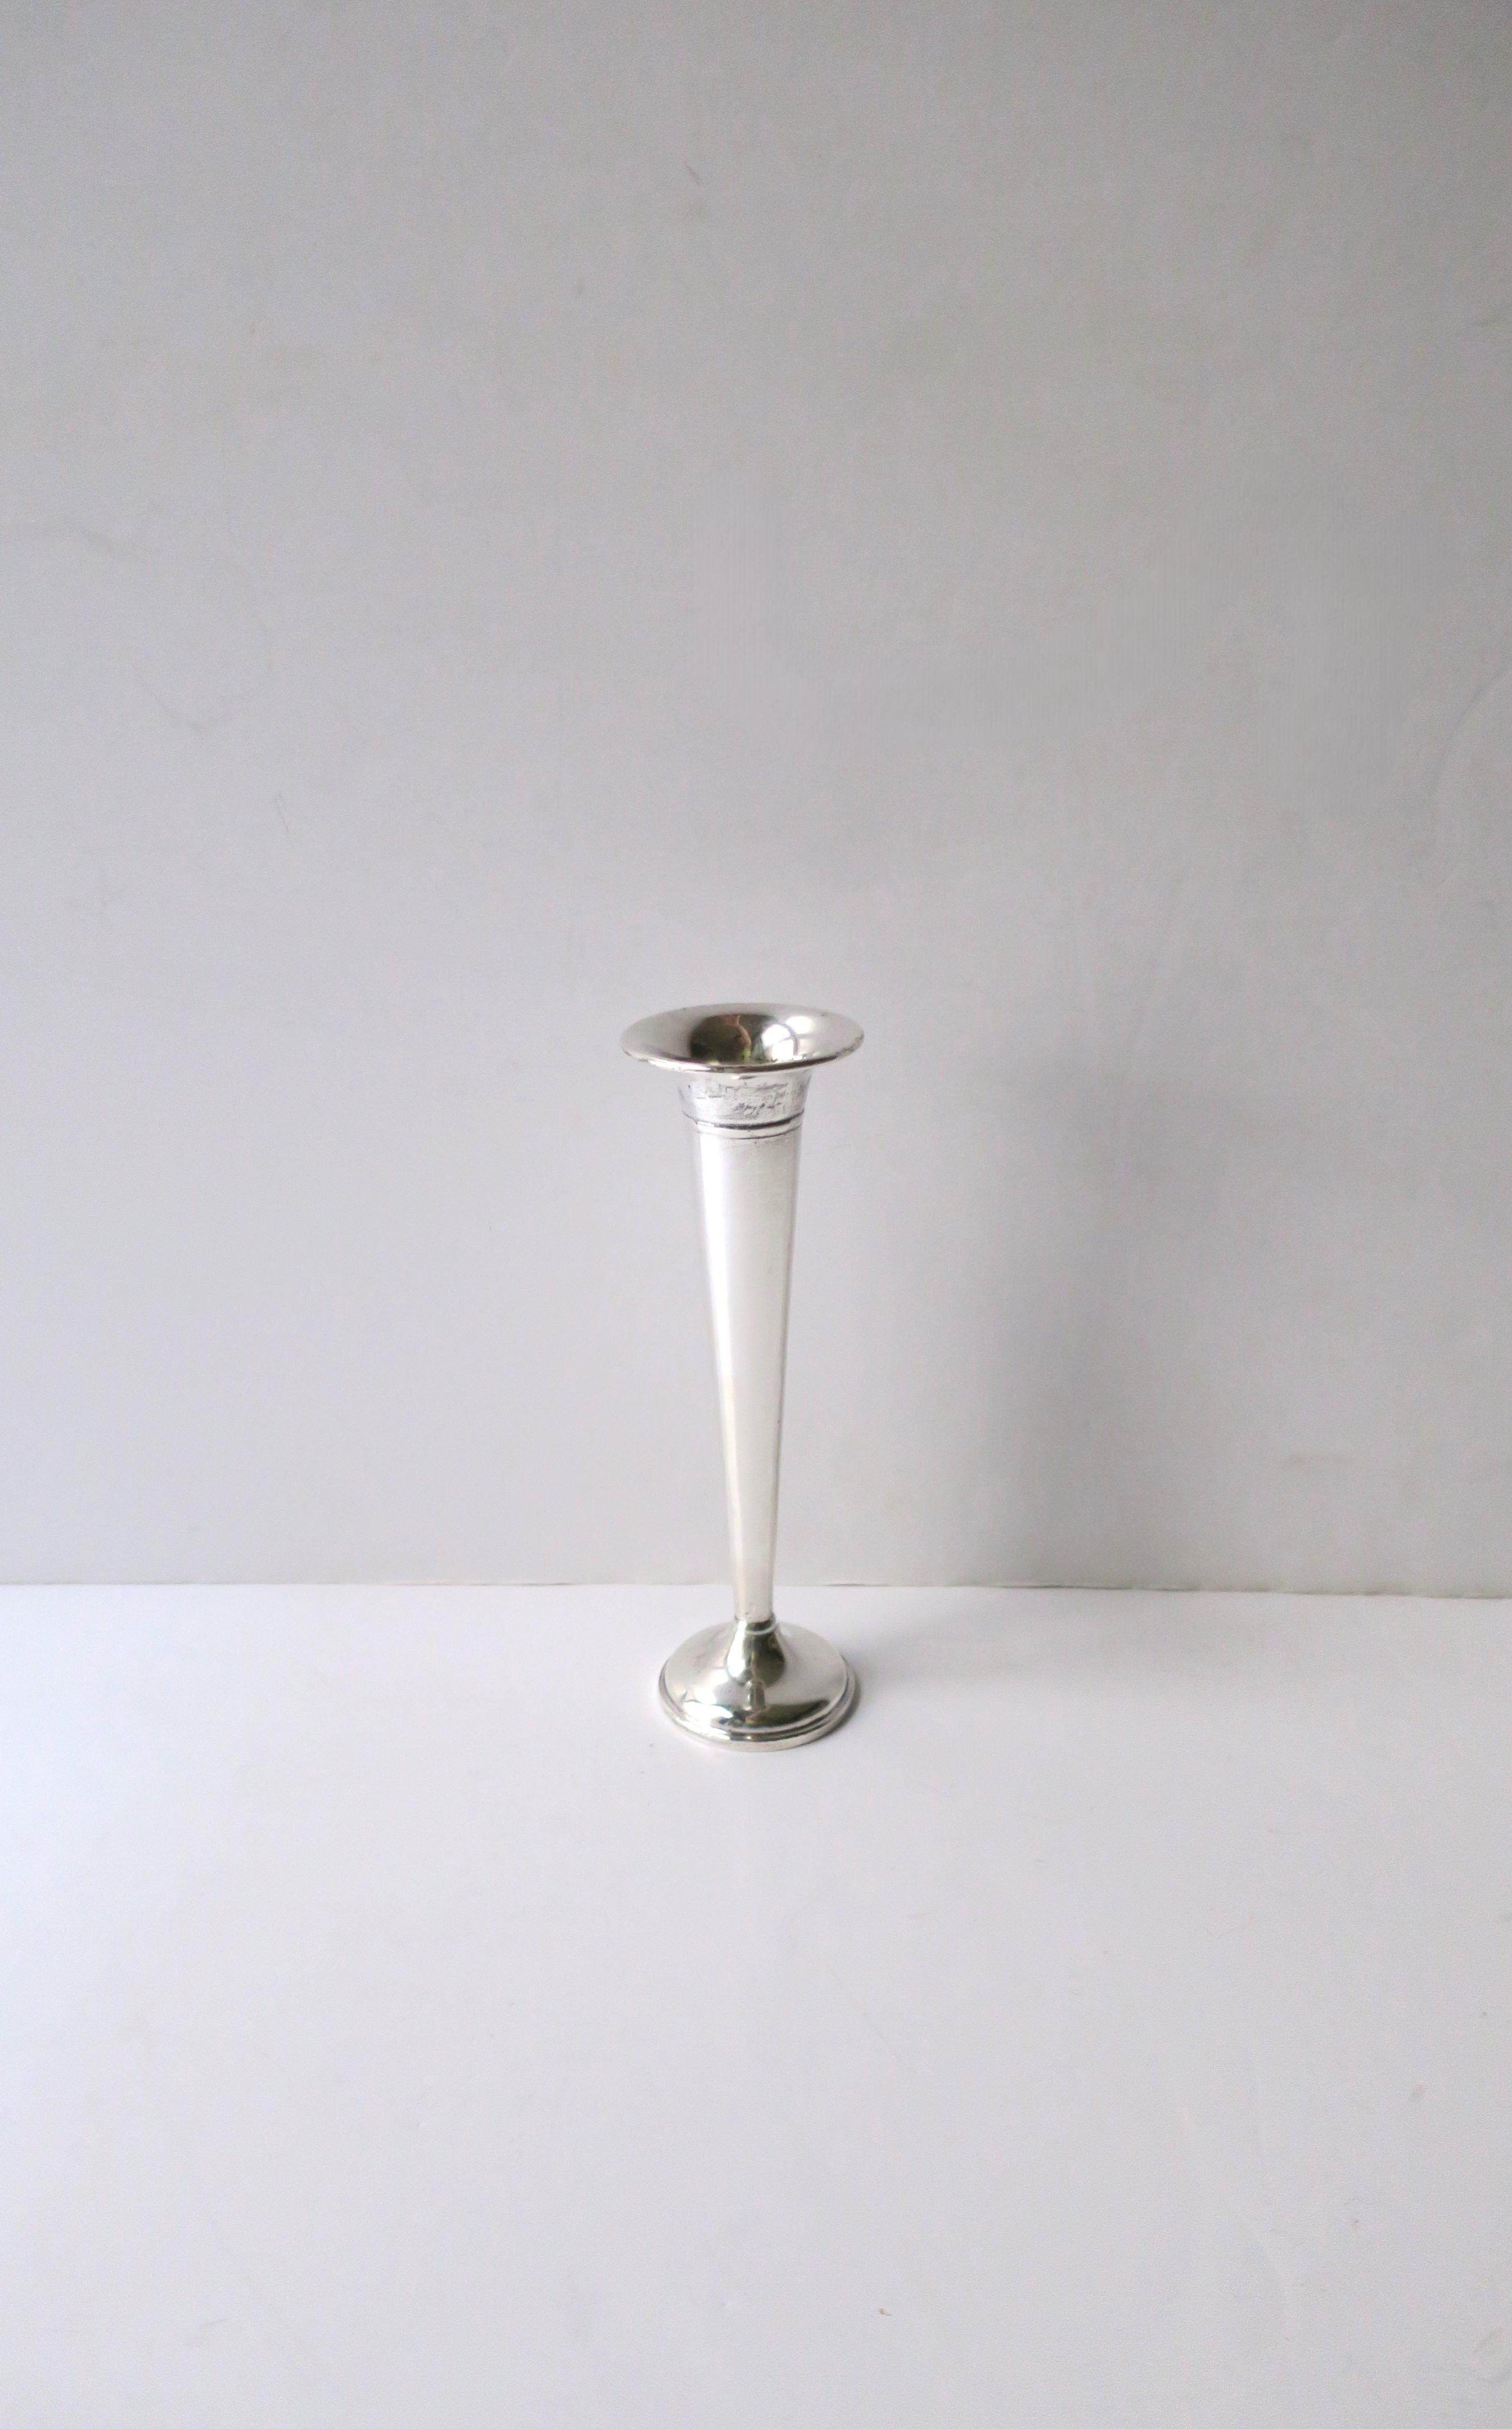 A sterling silver trumpet bud vase by Preisner, circa early-20th century. Beautiful as a standalone piece or with flower. Add to a table, shelf, vanity area, etc. And a great piece to start or add to a sterling silver collection. With makers' mark